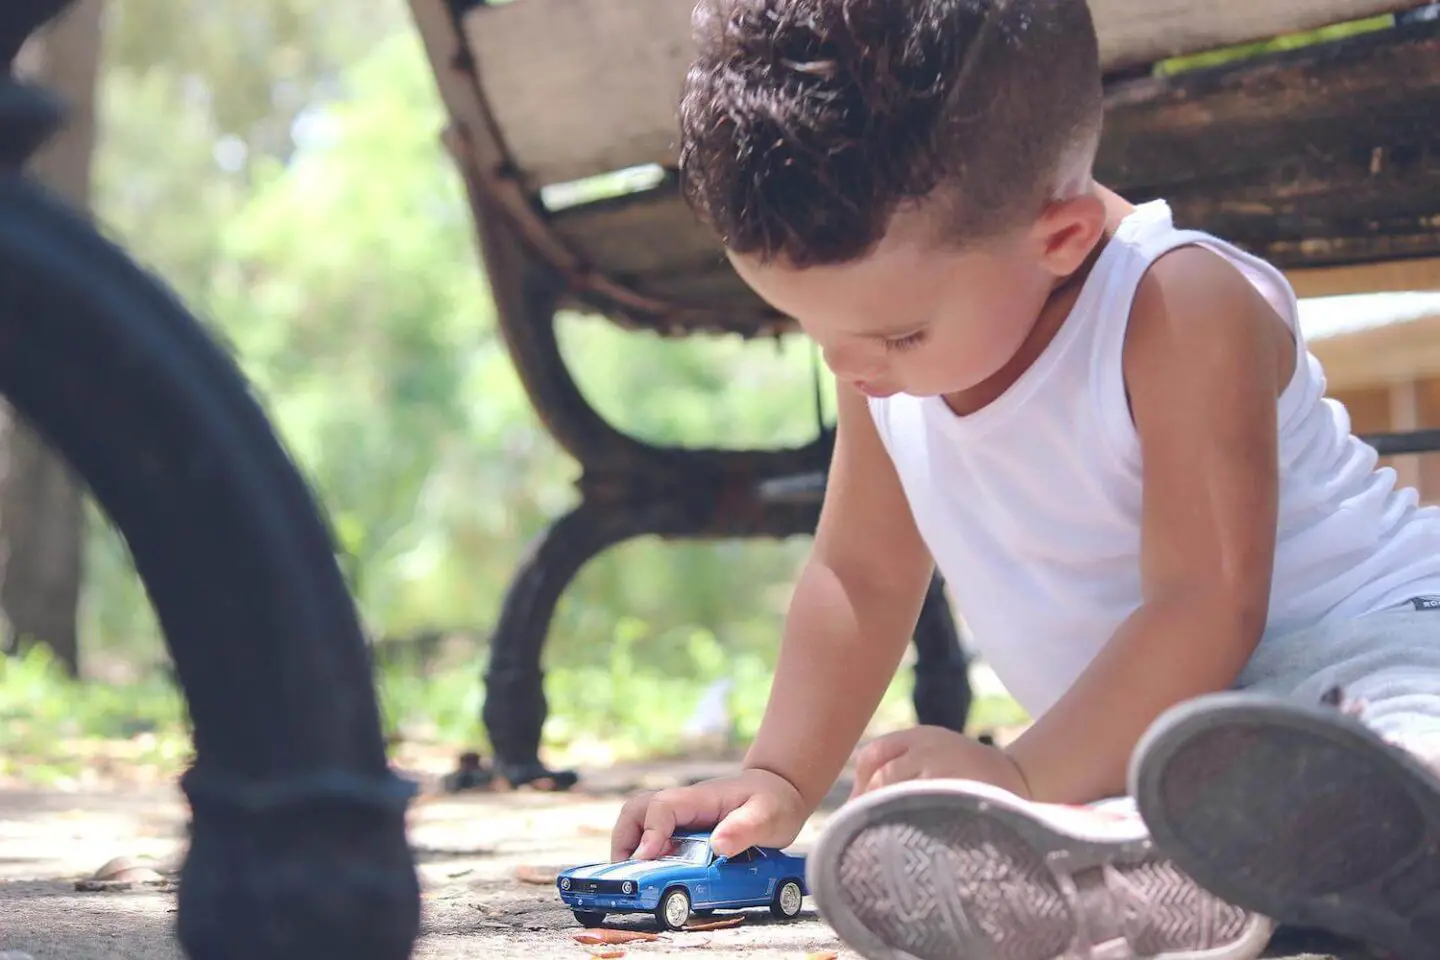 A toddler sitting on the floor pushing a blue toy car around